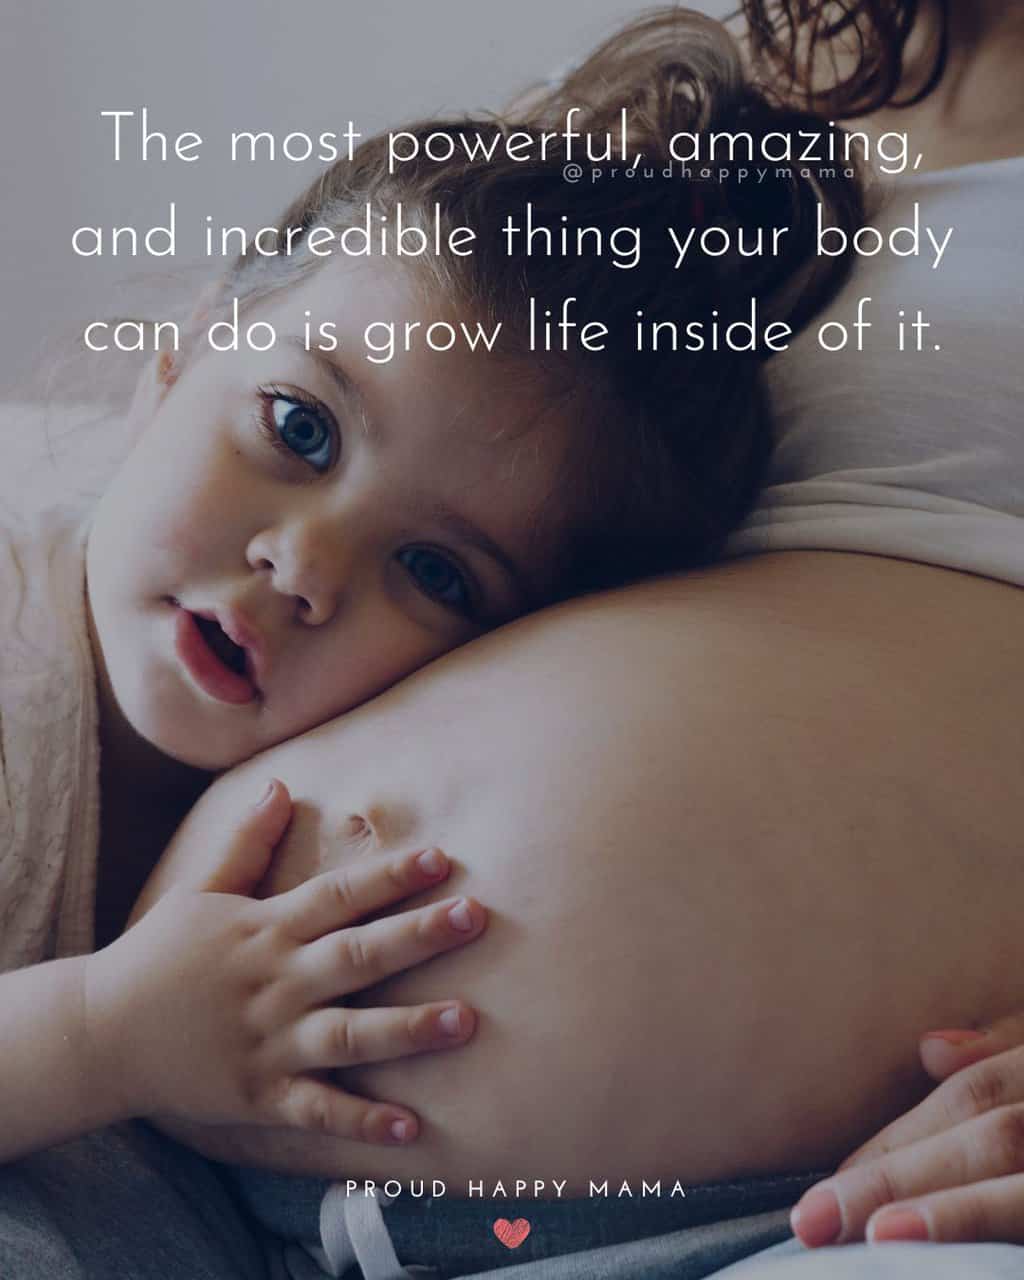 Pregnant lady quotes - 'The most powerful, amazing, and incredible thing your body can do is grow life inside of it.'